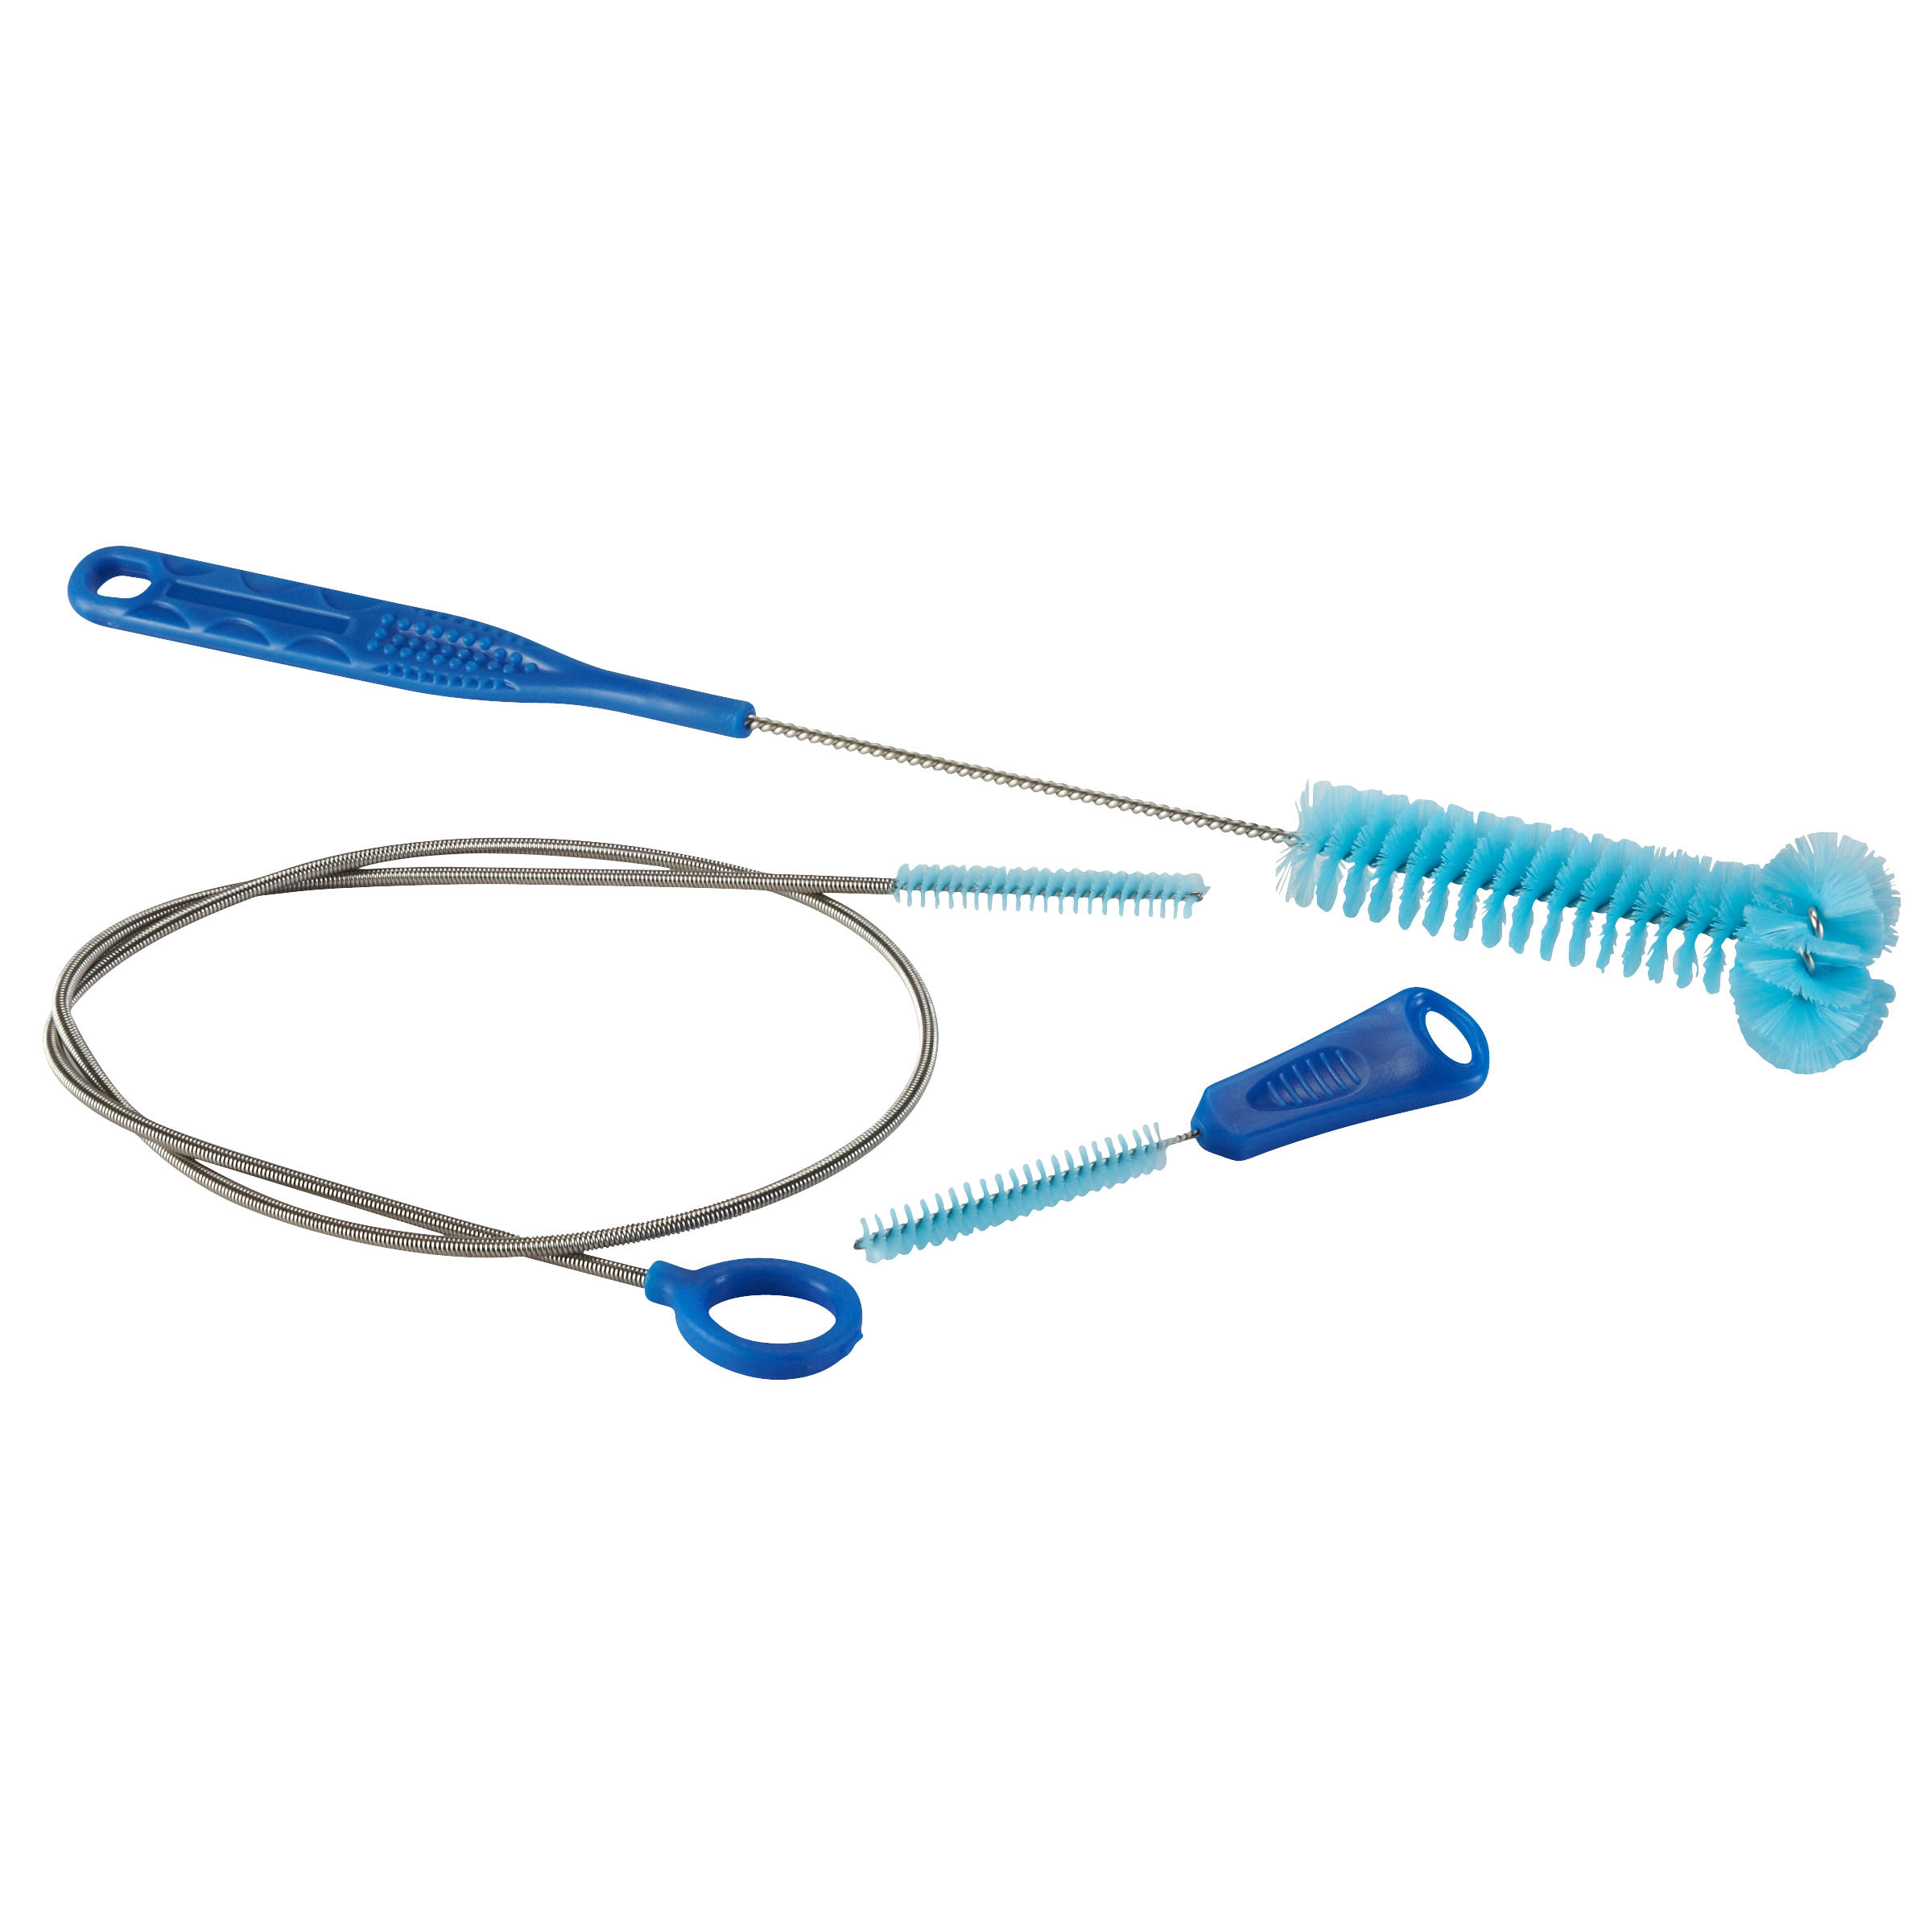 Hydration Bladder Cleaning Kit - Blue - BTWIN